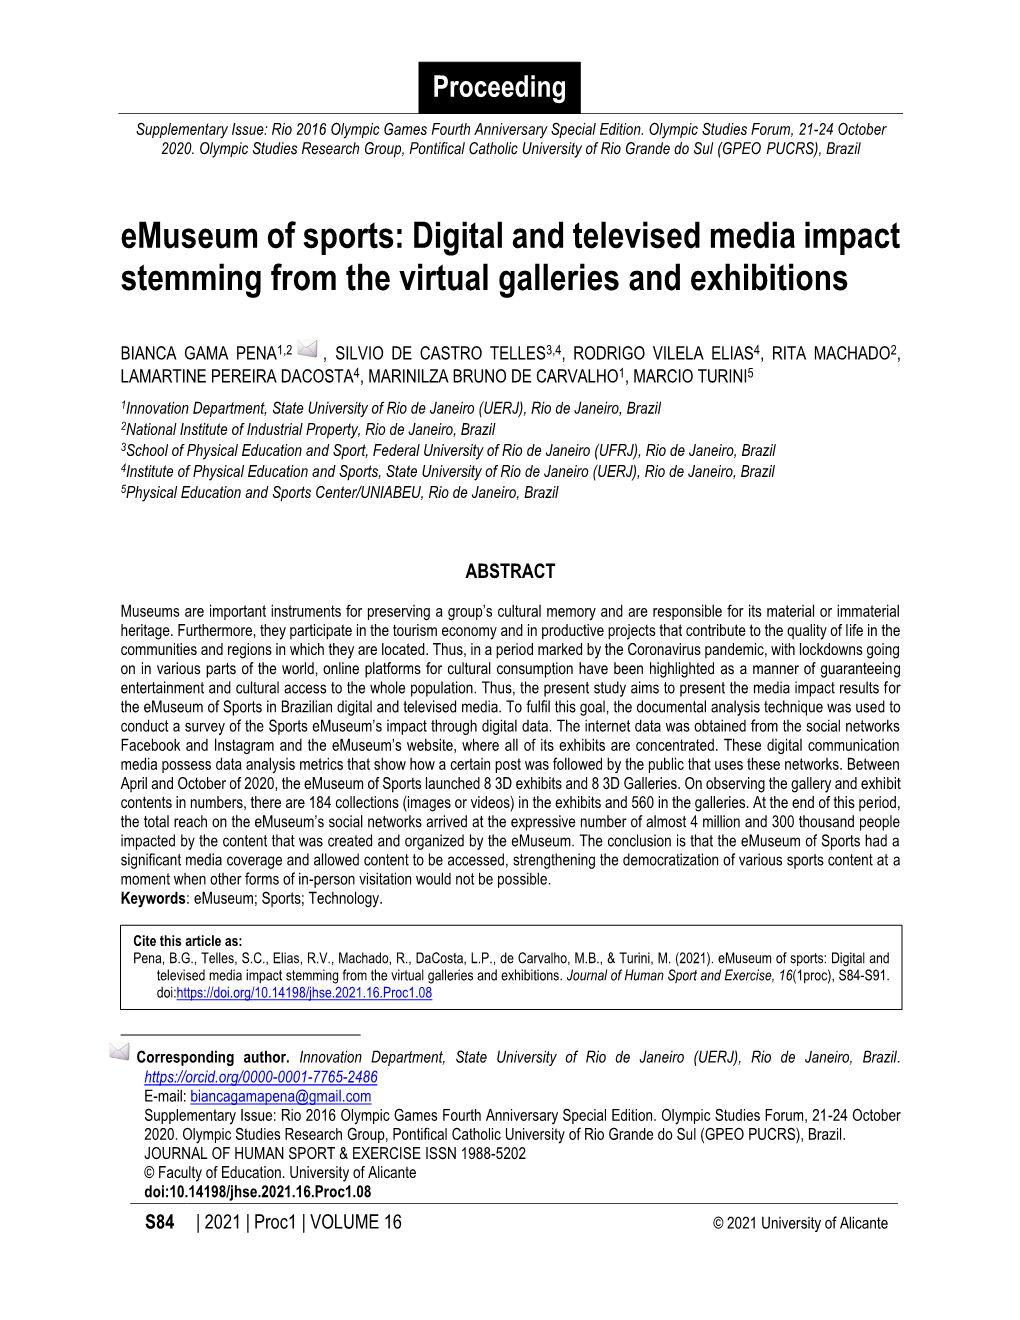 Emuseum of Sports: Digital and Televised Media Impact Stemming from the Virtual Galleries and Exhibitions